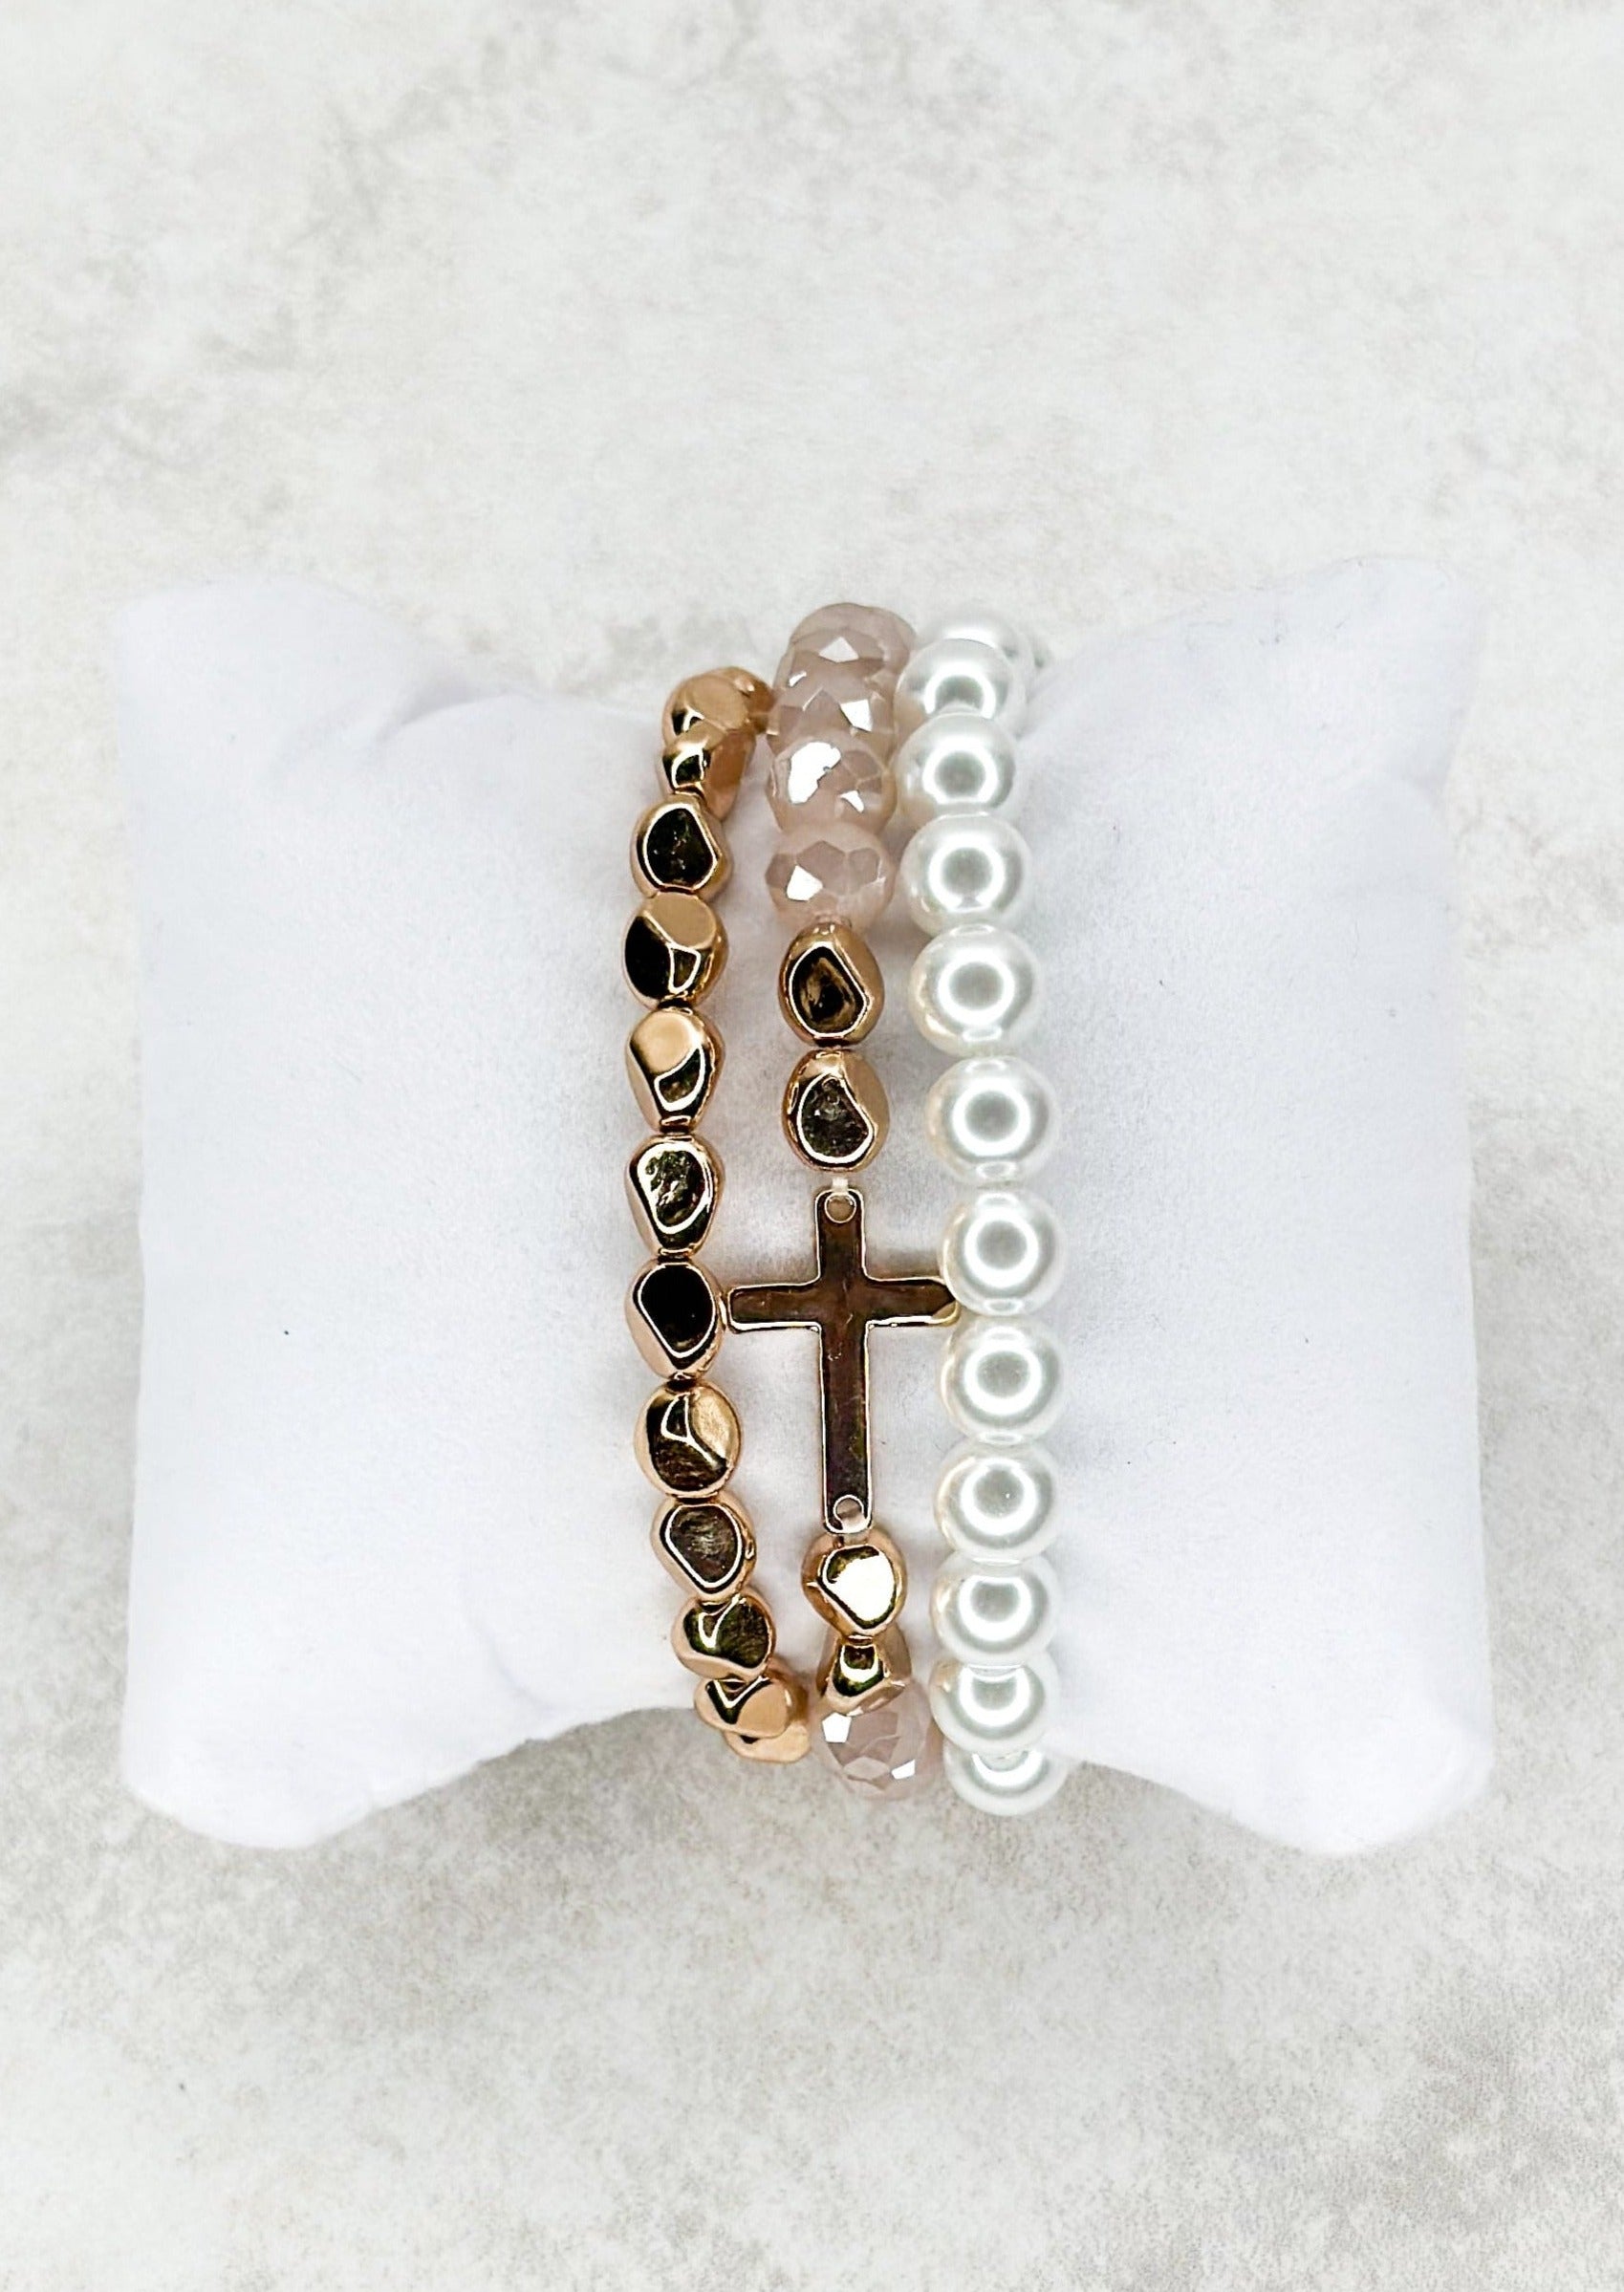 3 strand beaded stretch bracelets - one gold, one white pearl looking - one light pink colored with gold and a single gold cross